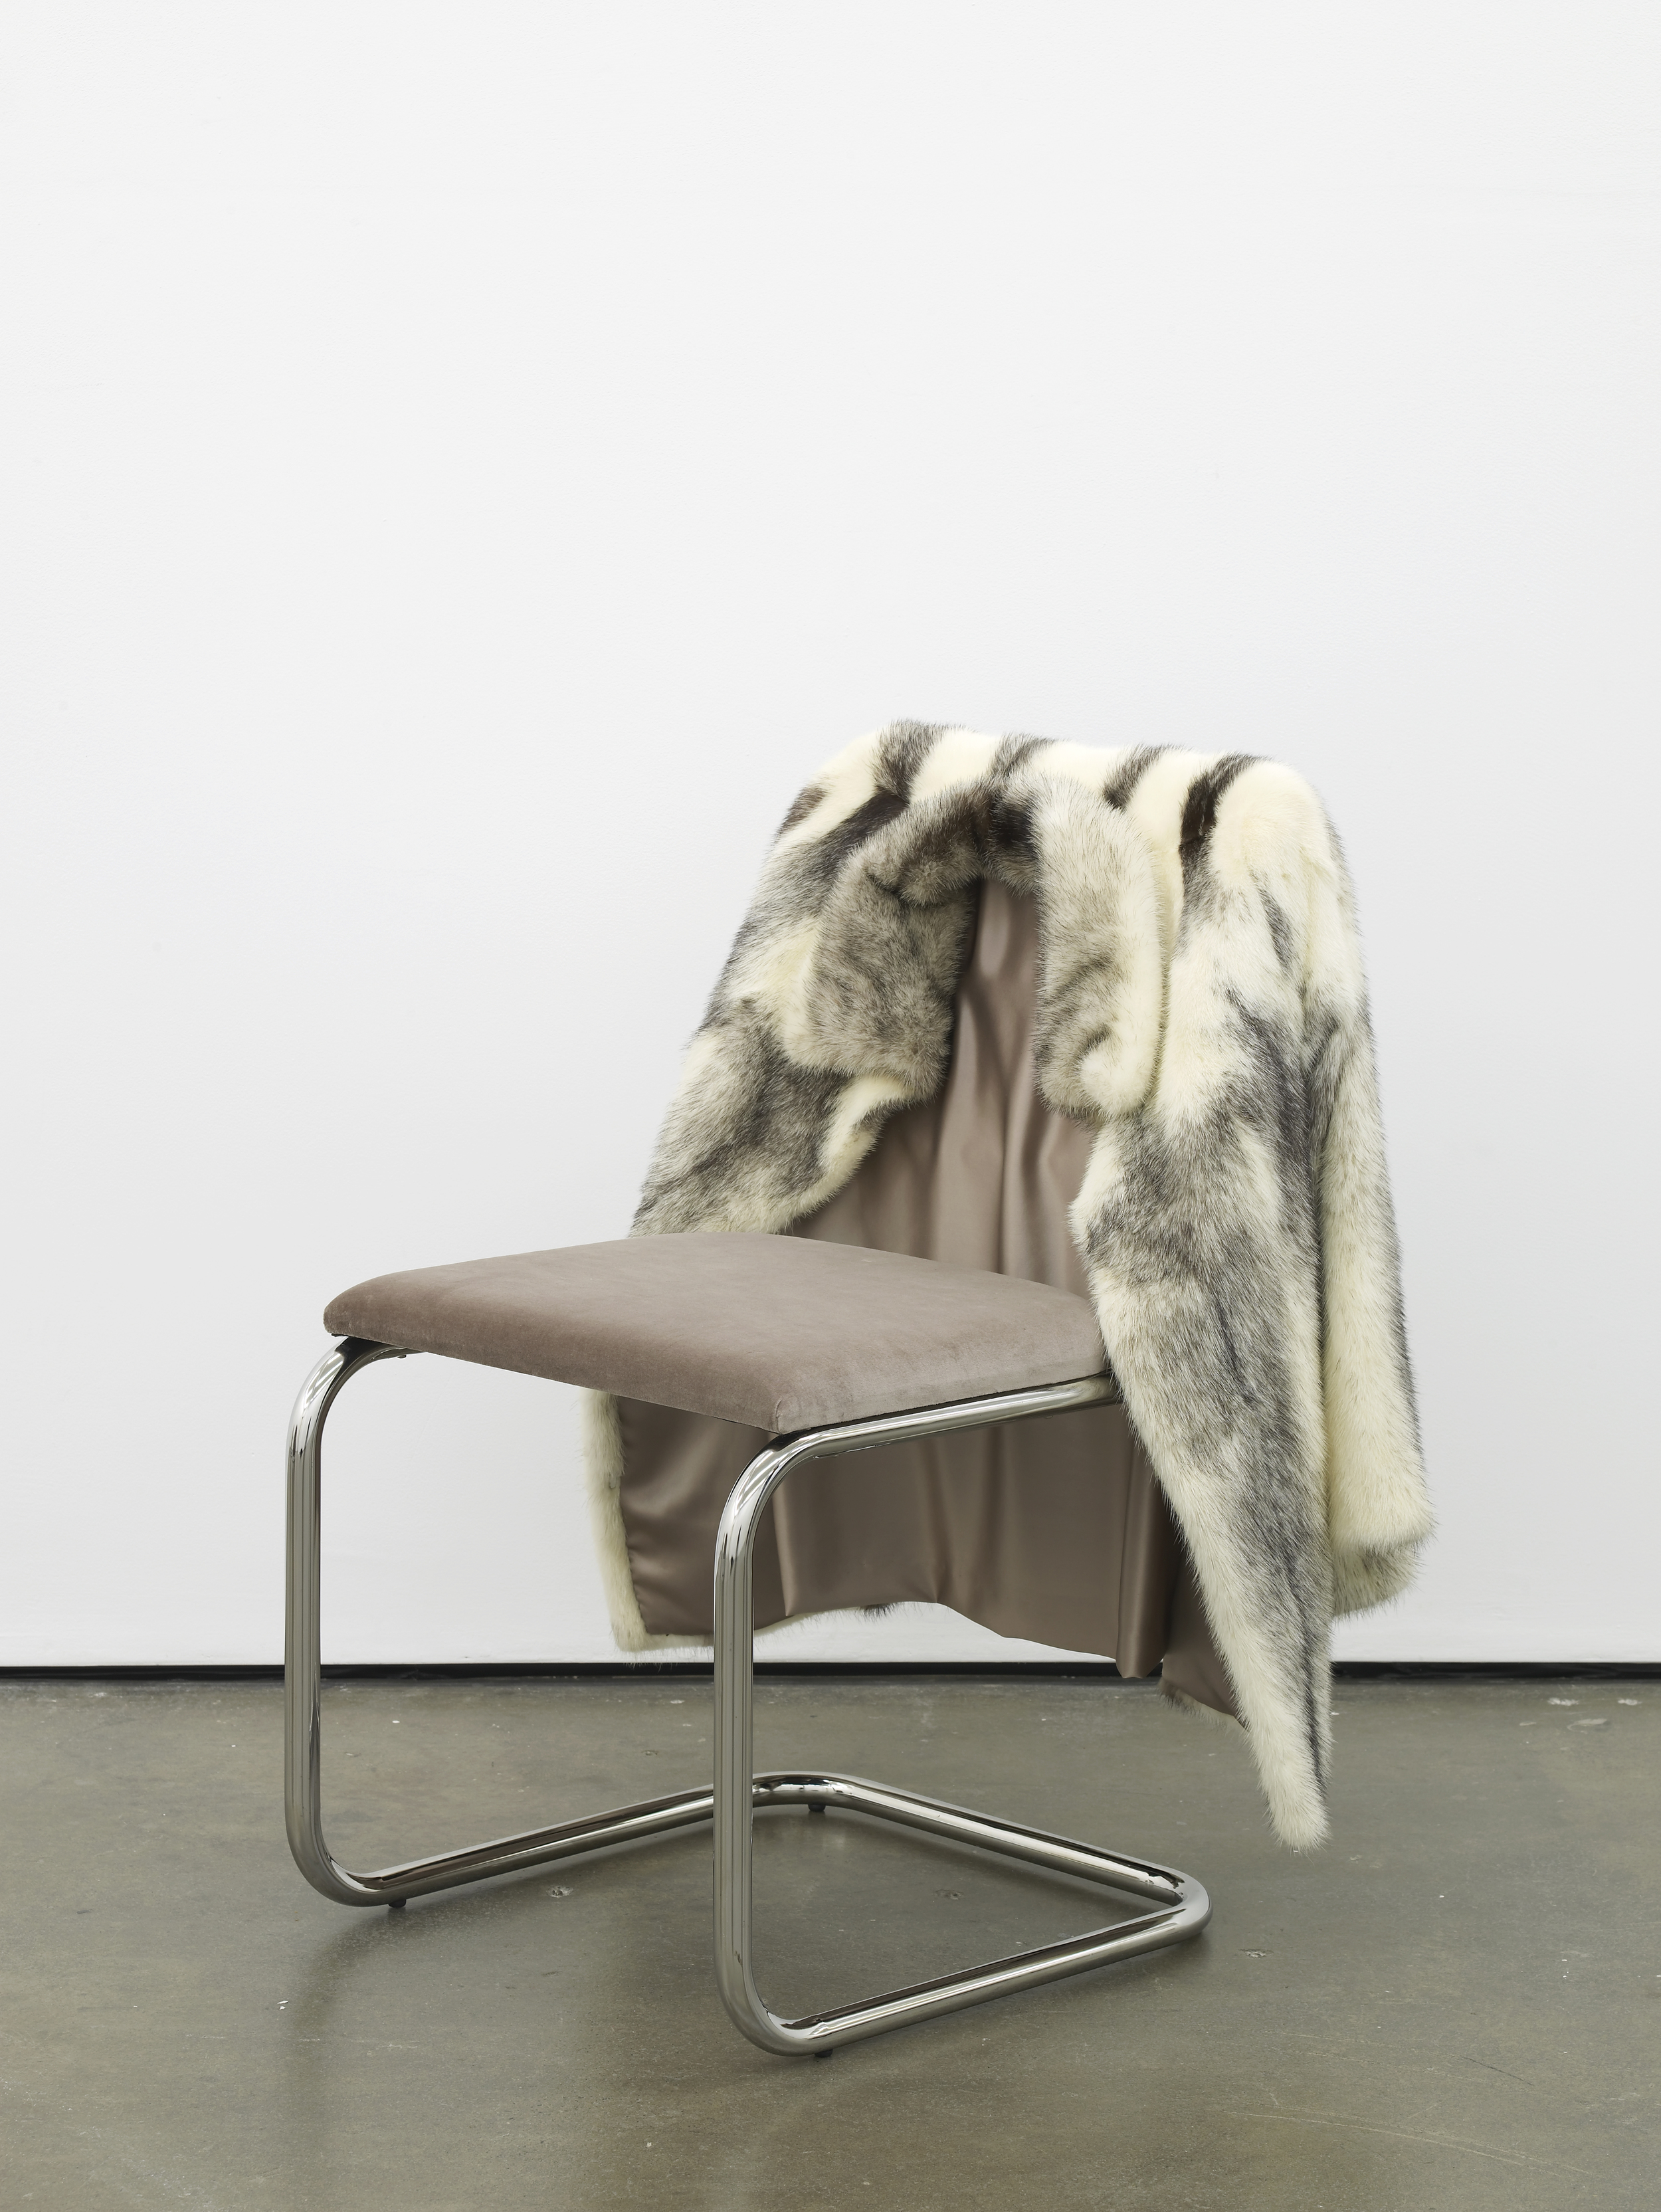     Untitled Chair - CBM-0 2015 Vintage fur, steel tubing, upholstery, silk and velvet 85 x 65 x 60 cm / 33.4 x 25.5 x 23.6 in 